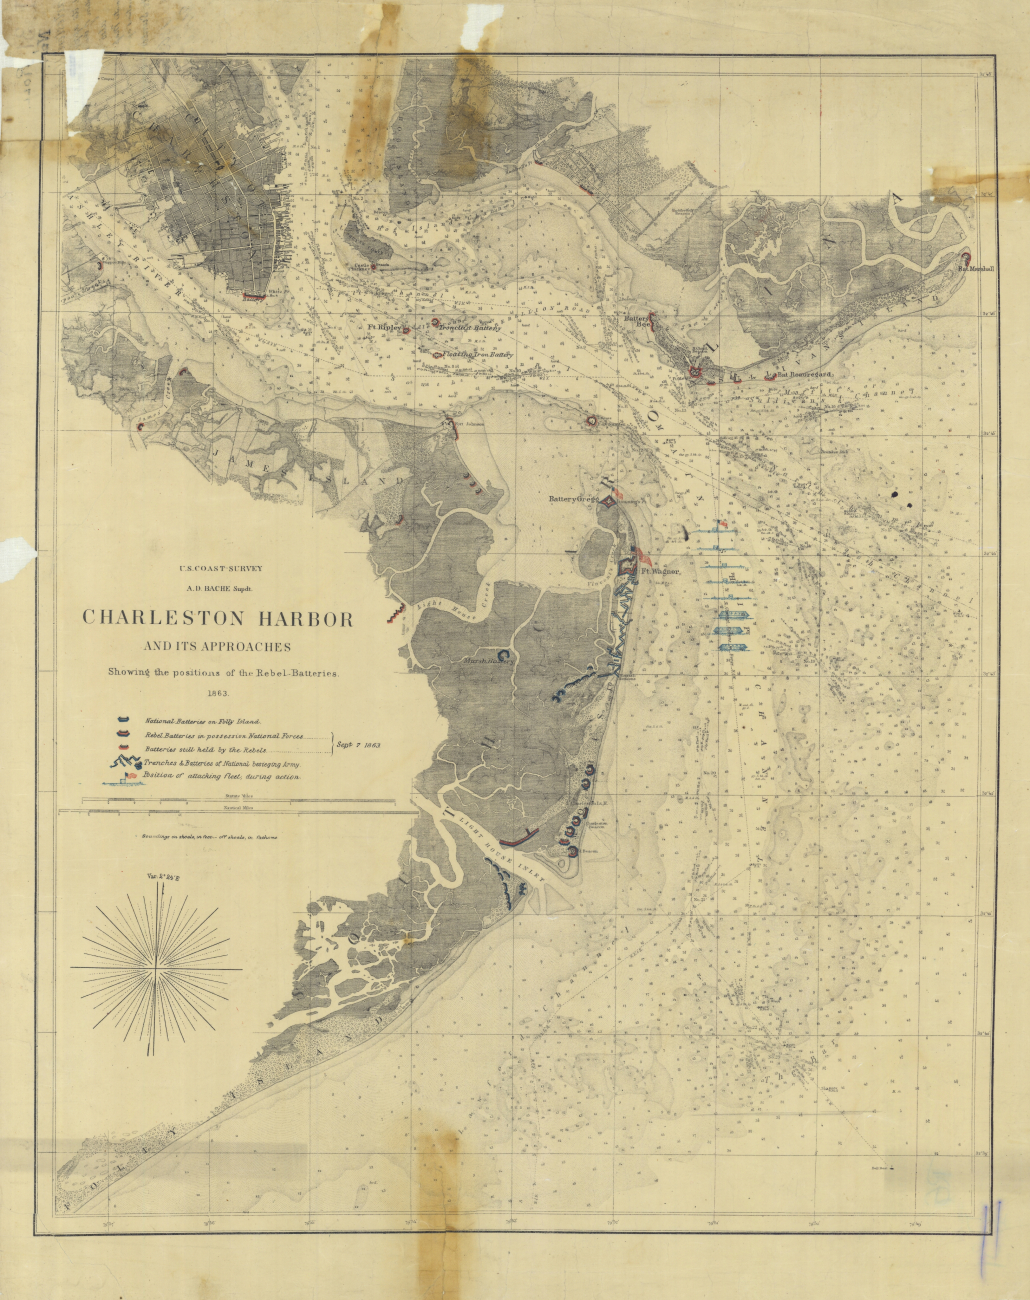 Chart of Charleston Harbor entrance showing position of Union and Confederatebatteries as of September 7th, 1863, the day Fort Wagner fell